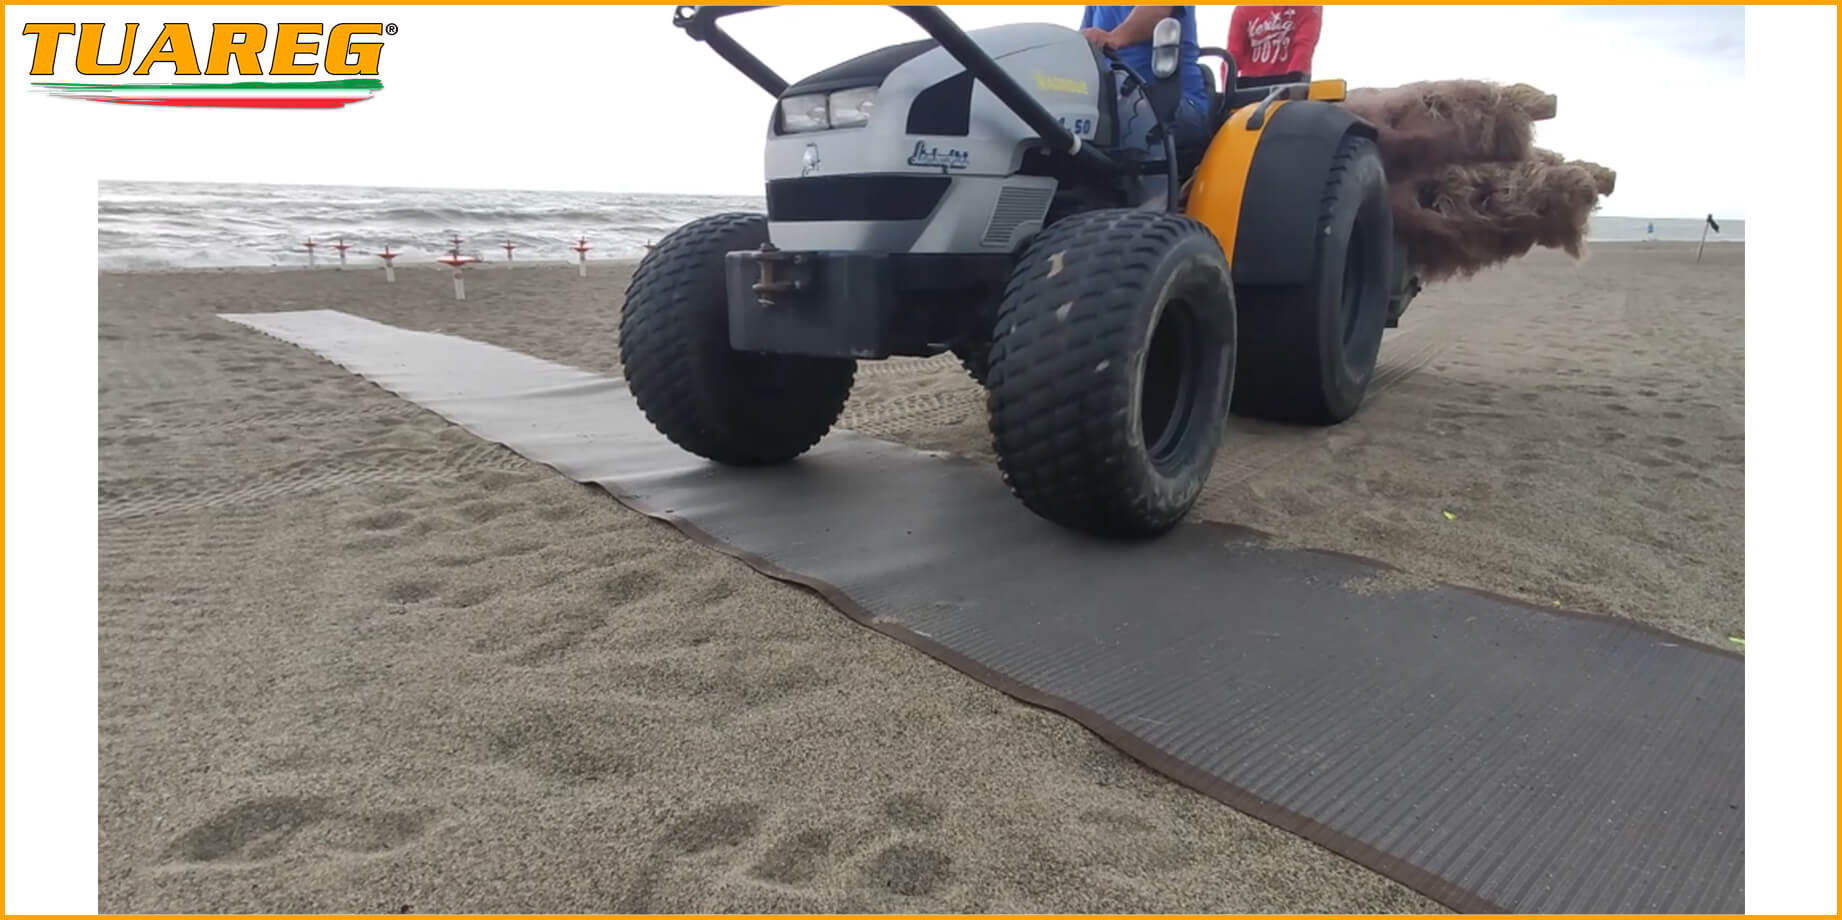 Rollable Beach Rug / Walkway - Tuareg Access - Product/Accessory for Beach Accessibility